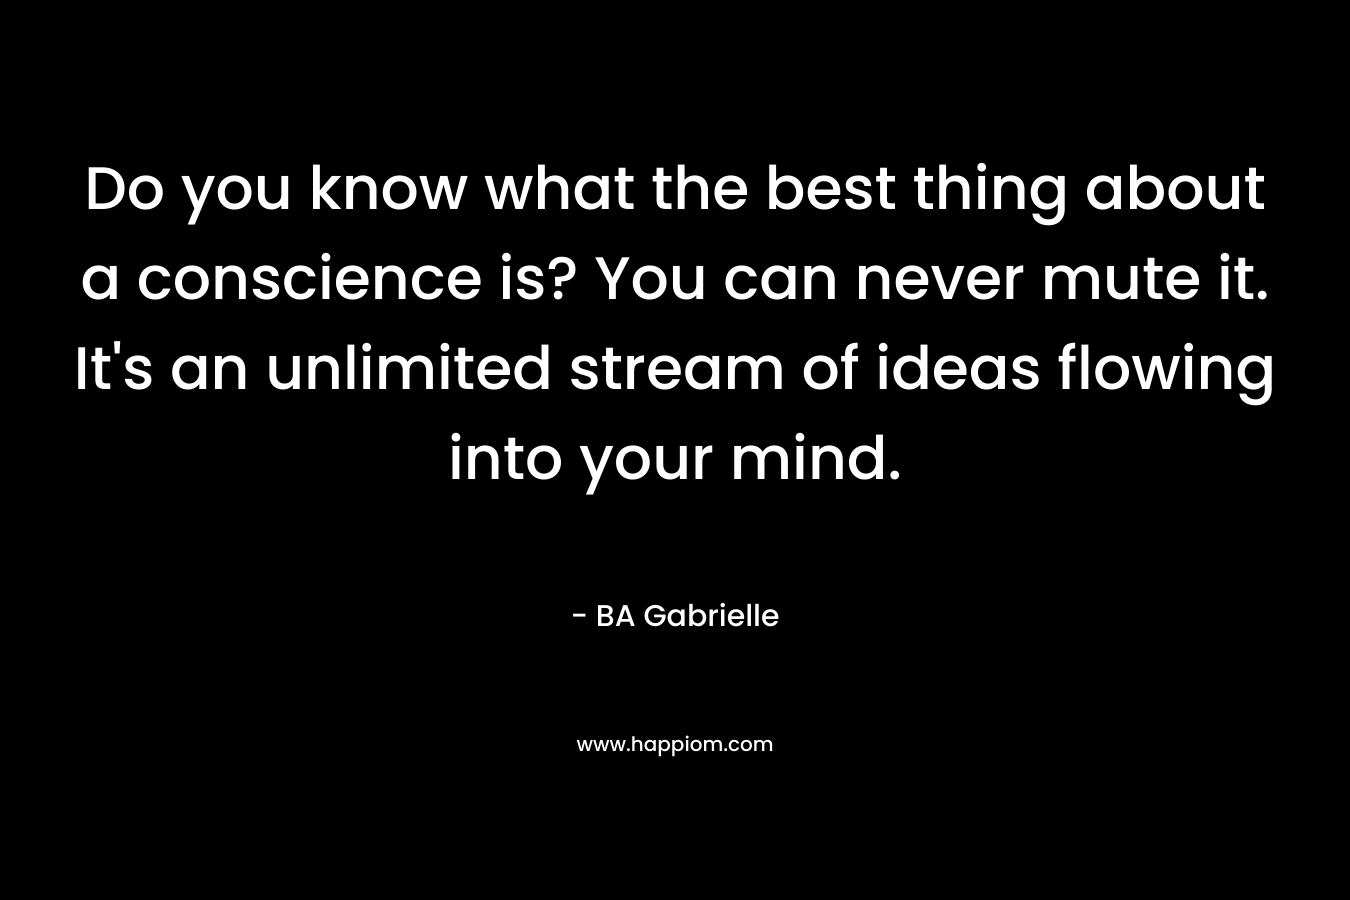 Do you know what the best thing about a conscience is? You can never mute it. It’s an unlimited stream of ideas flowing into your mind. – BA Gabrielle